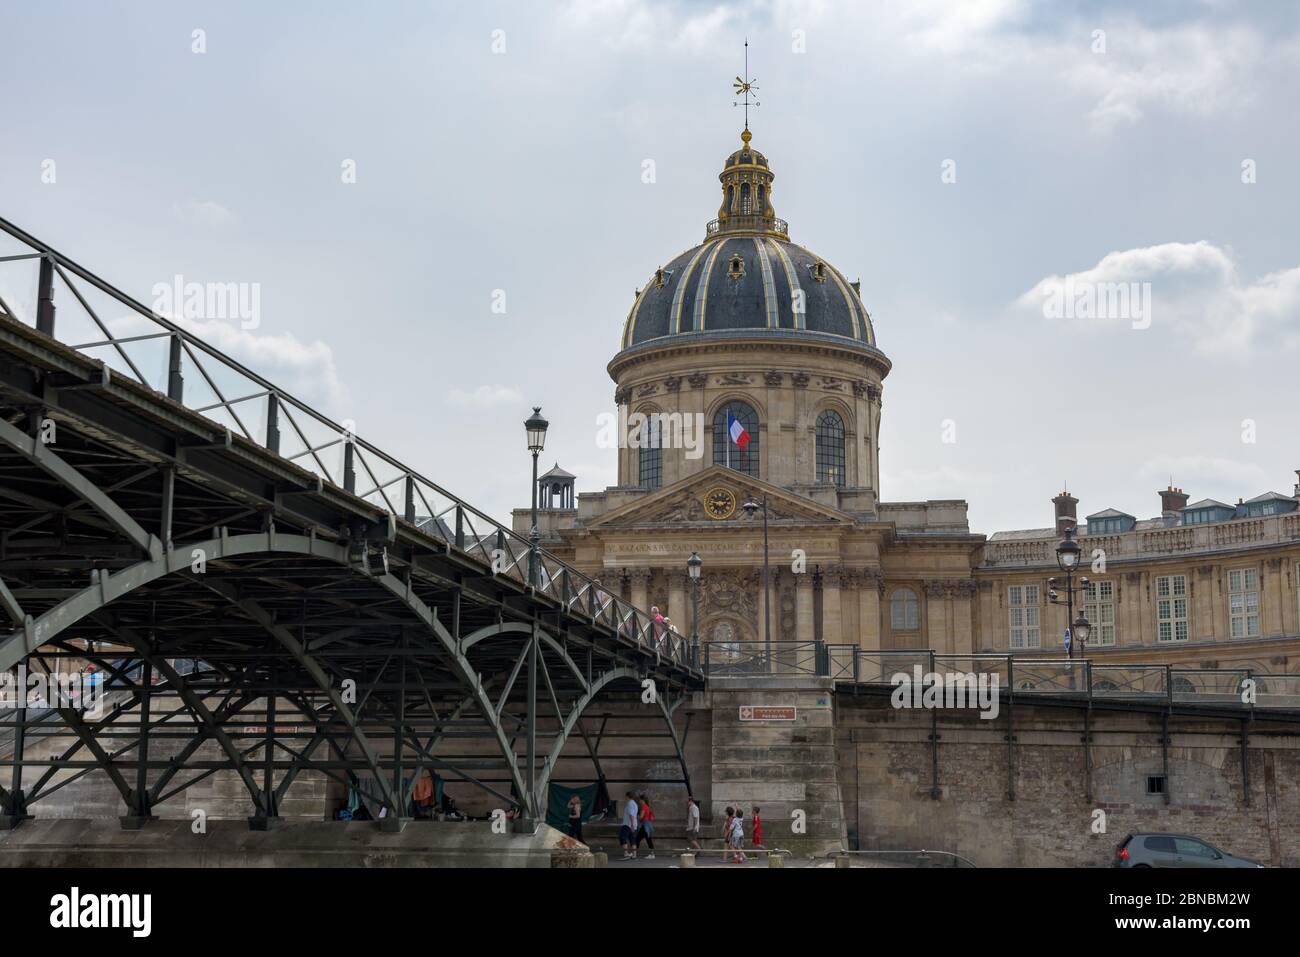 Paris, France. View of the Pont des Arts bridge and the Institut de France, grand cupola-topped building in baroque style. Stock Photo